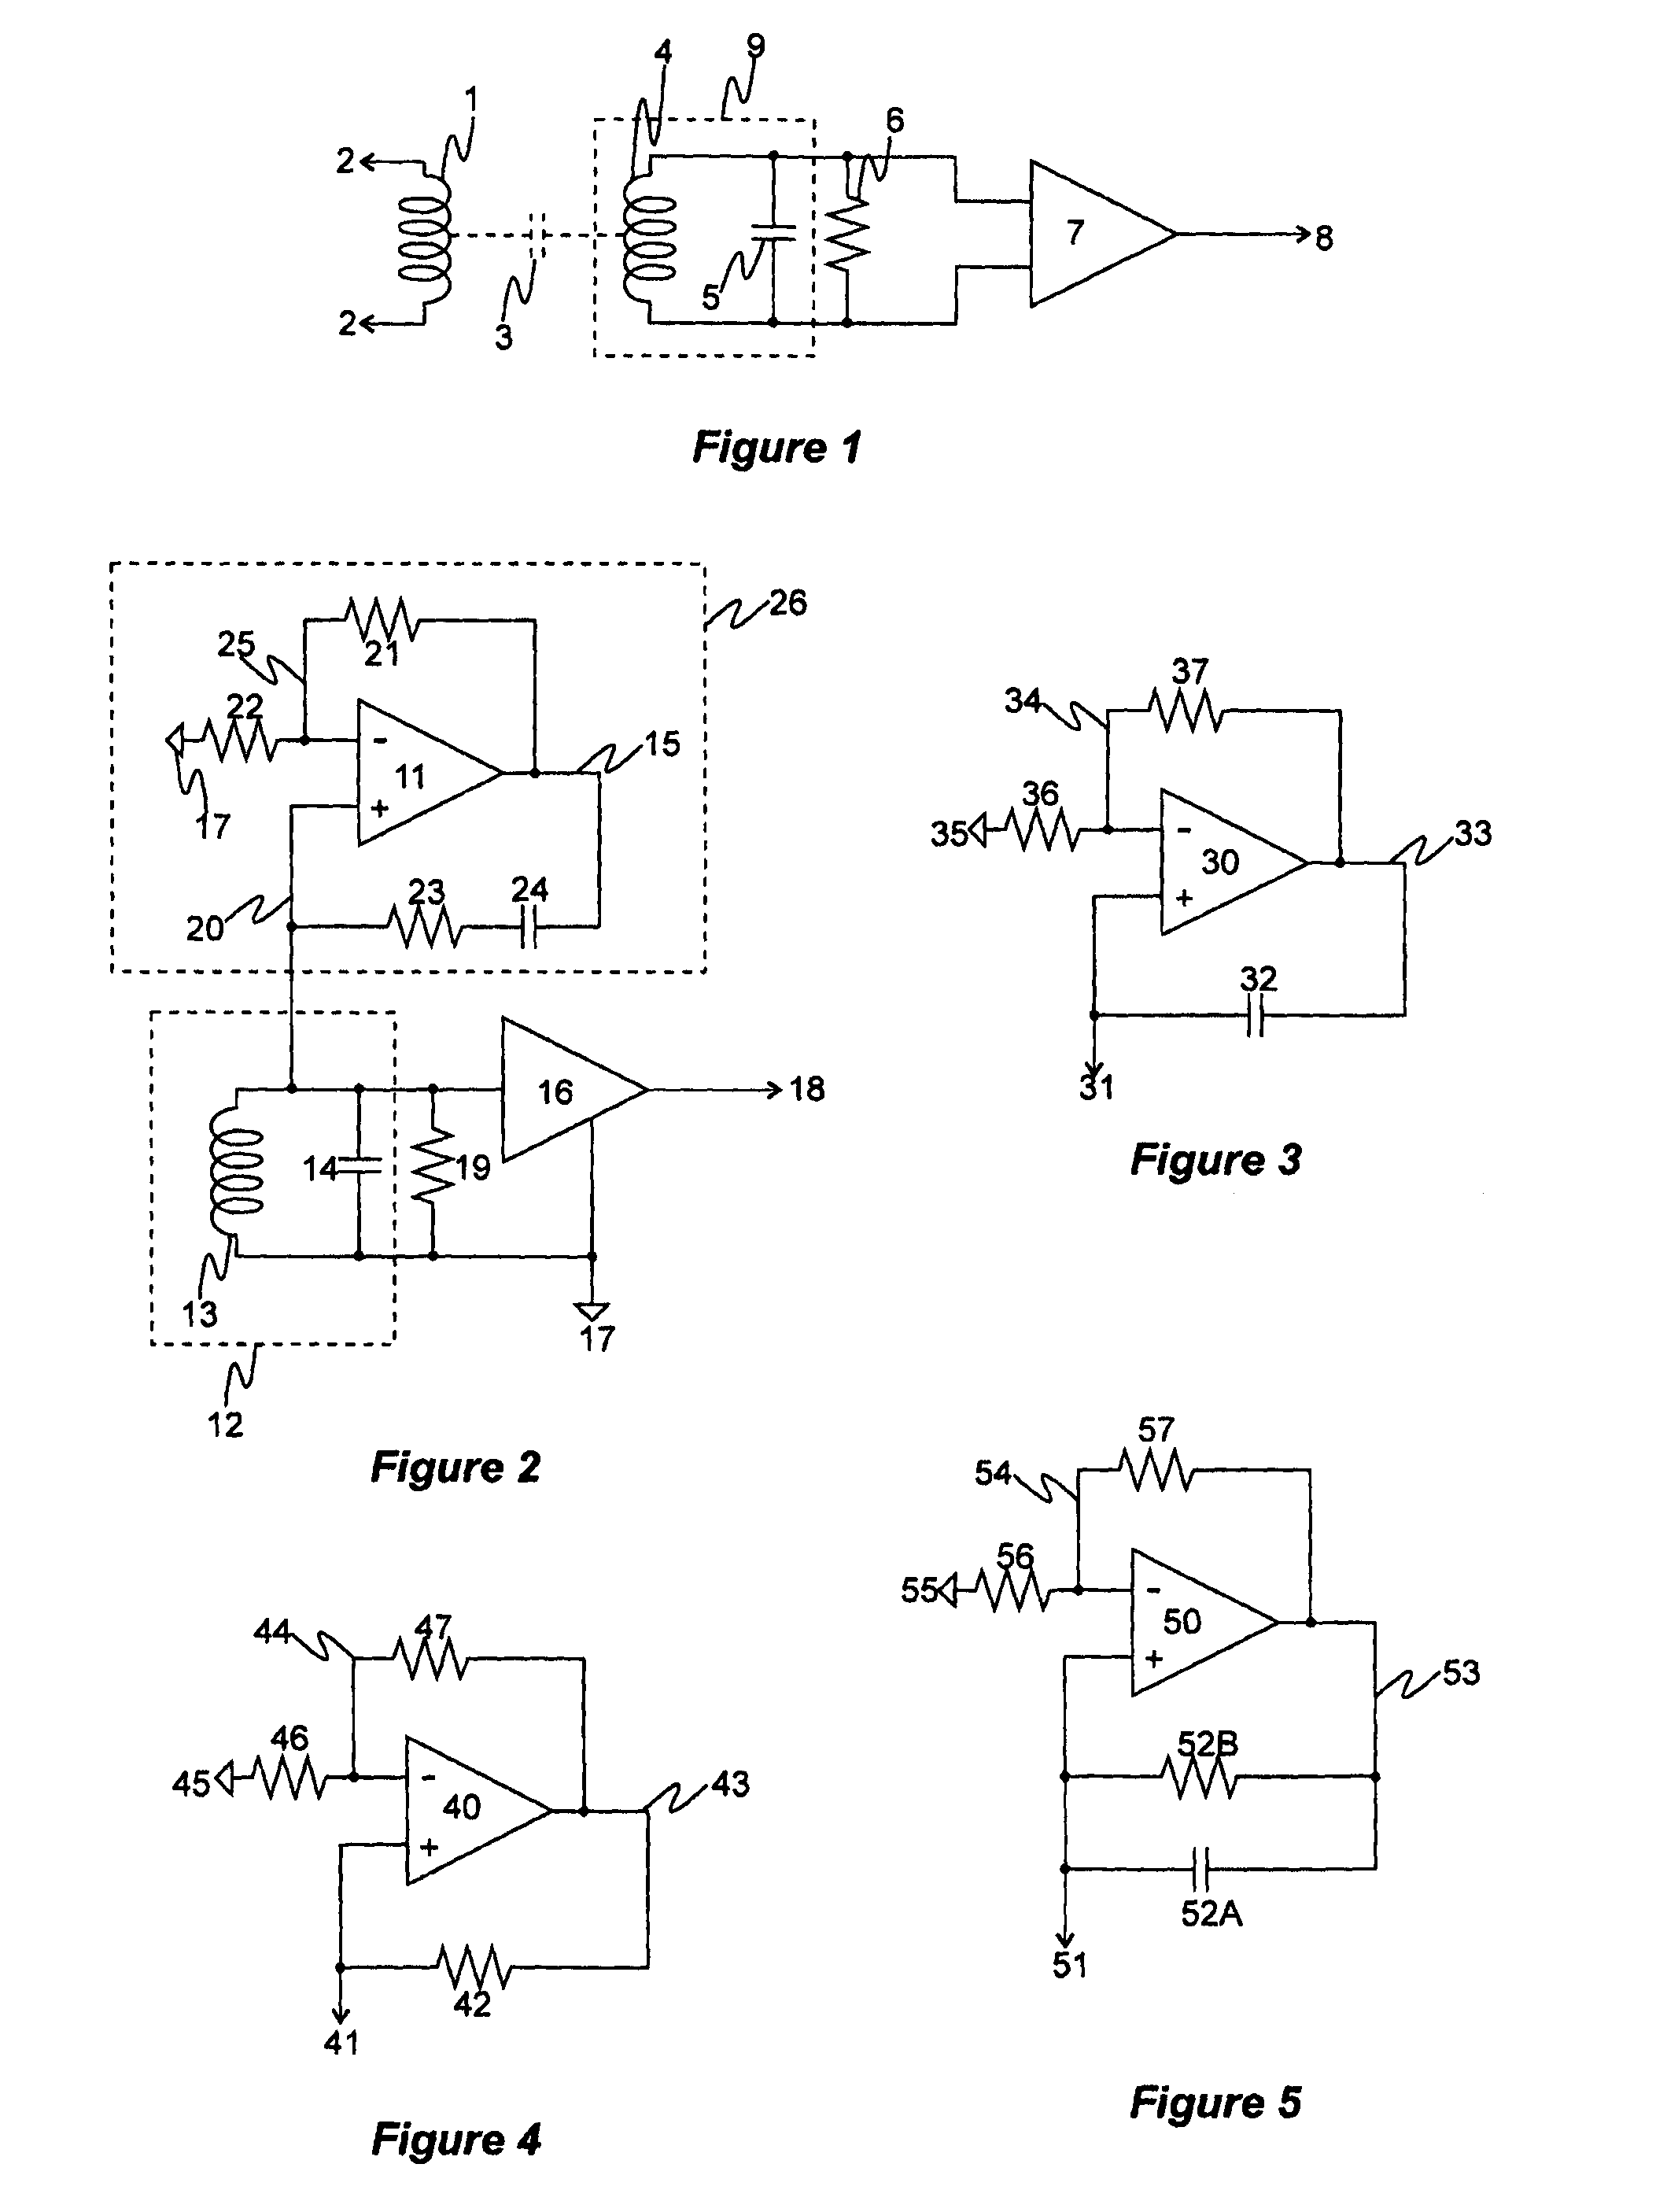 Method for detecting fast time constant targets using a metal detector